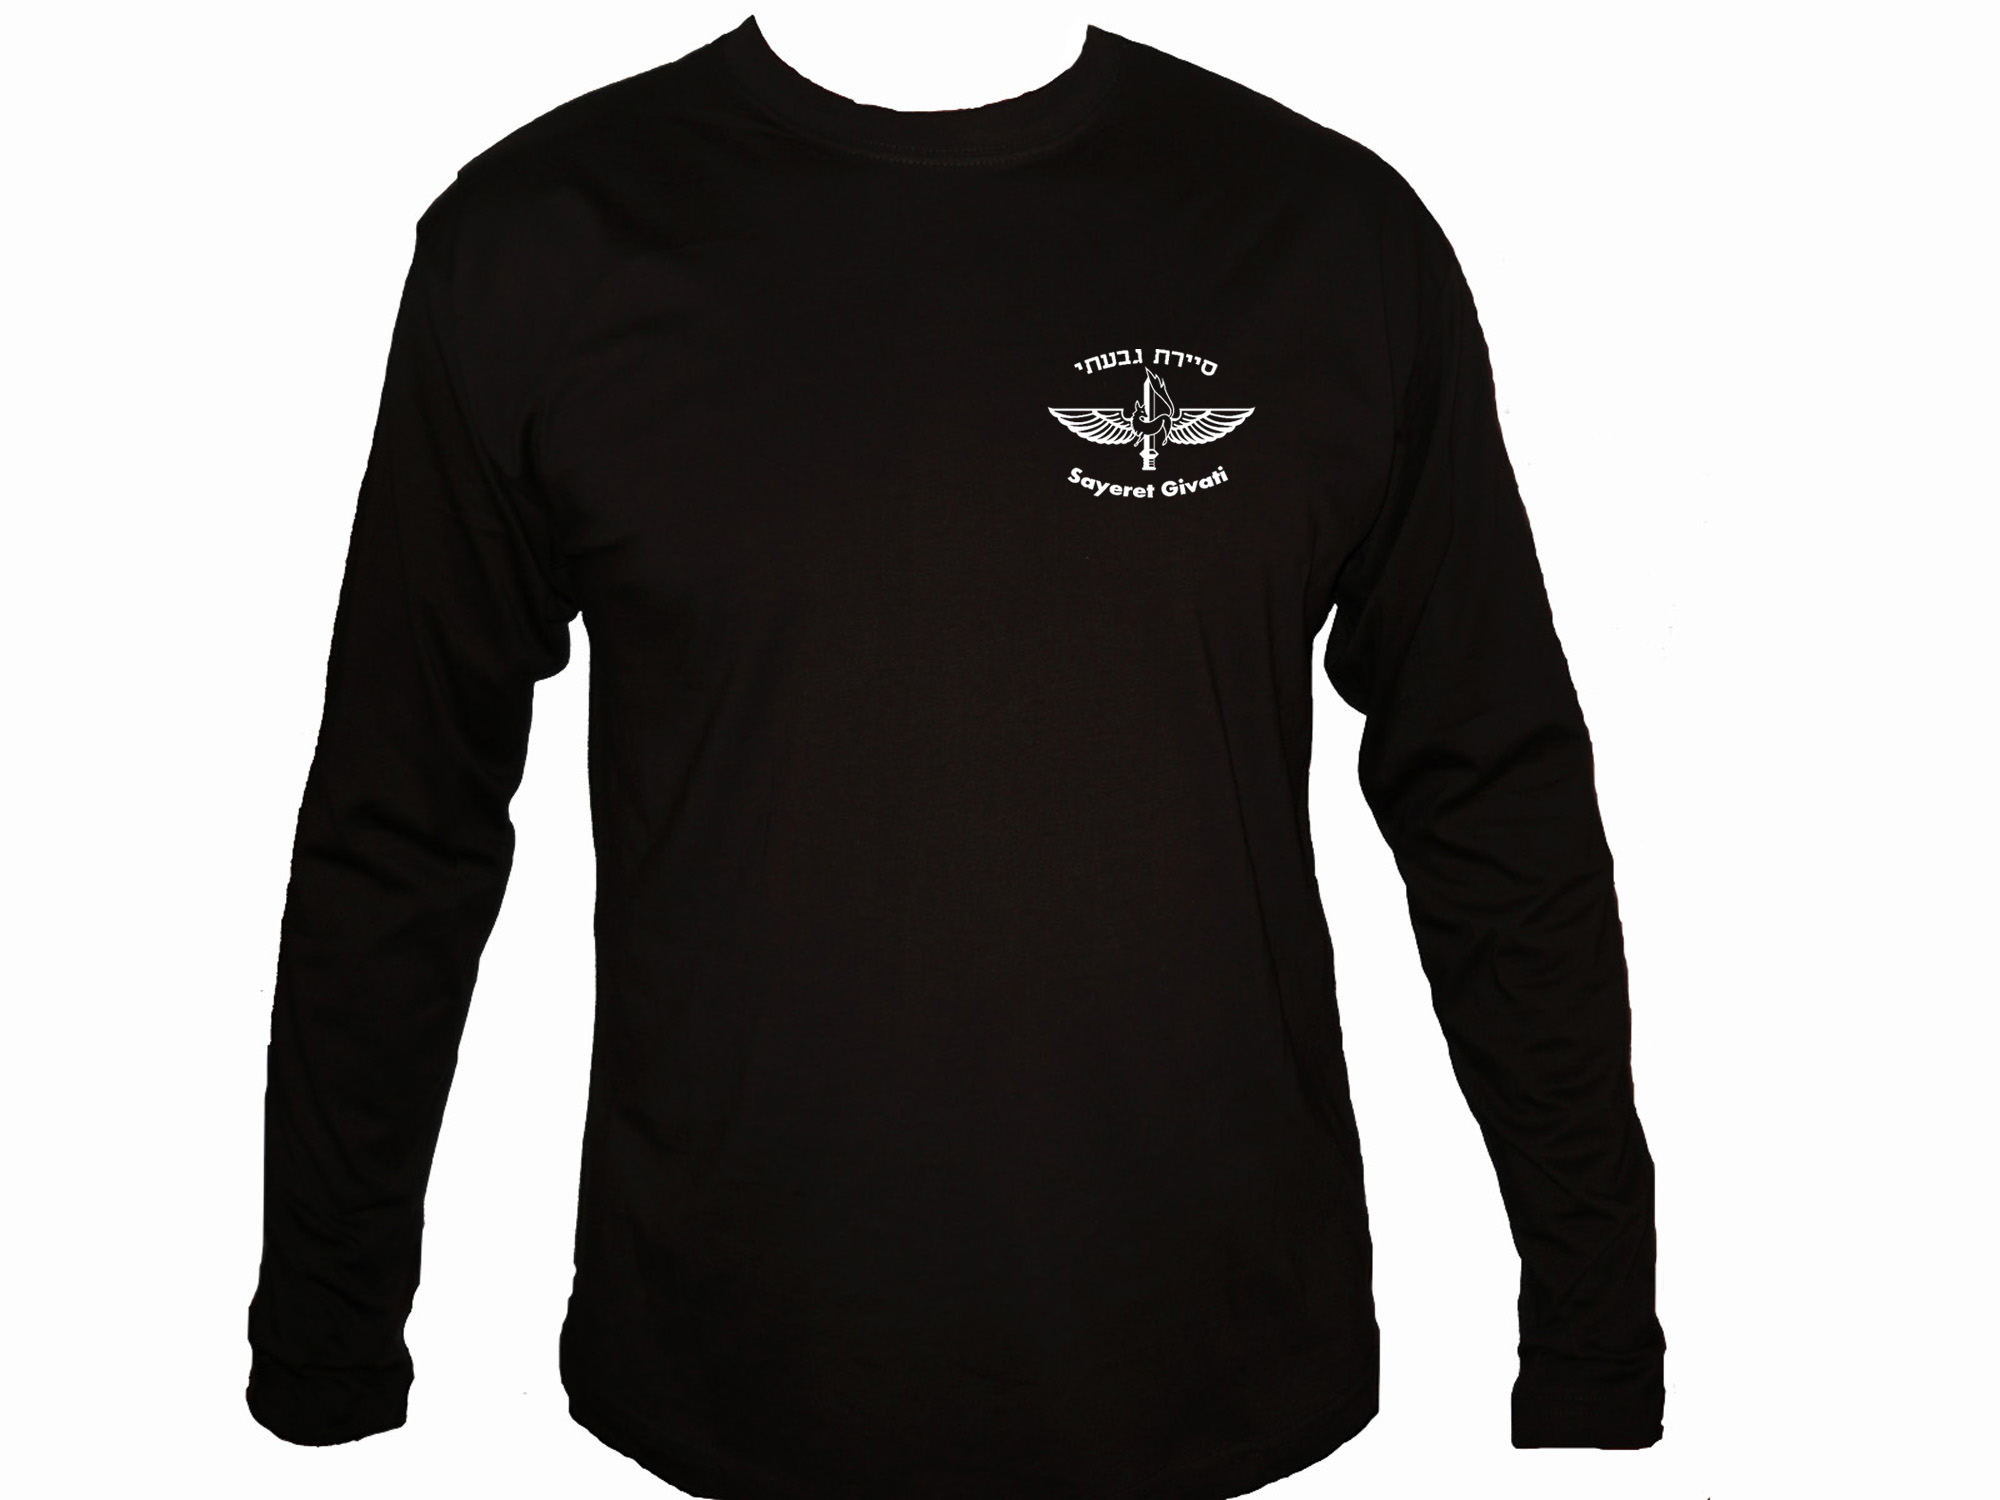 Sayeret Givati Brigade IDF Israel Army special forces long sleeves t-shirt